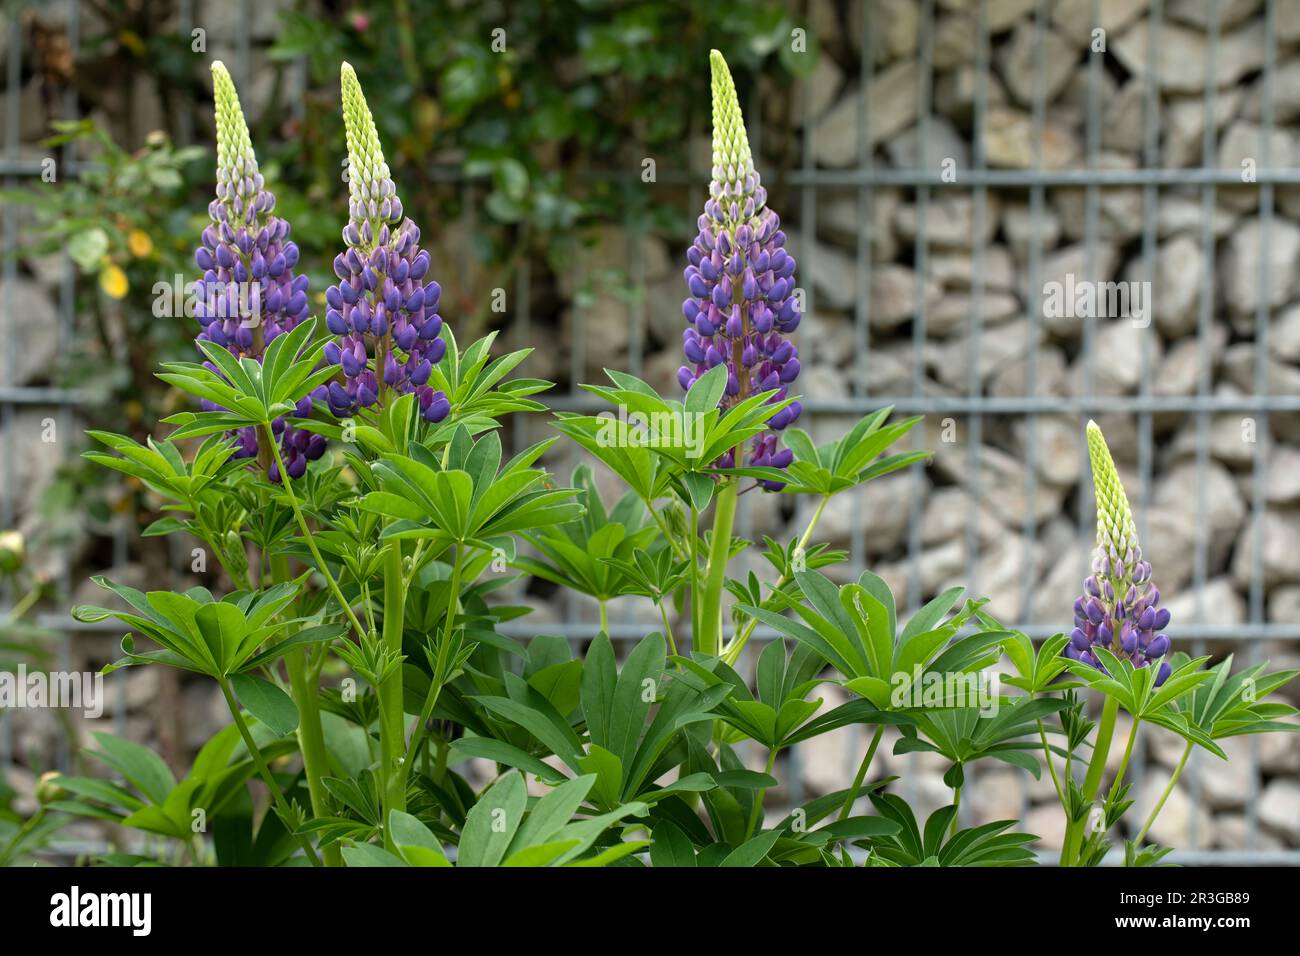 Blooming Lupinus plant in a garden Stock Photo